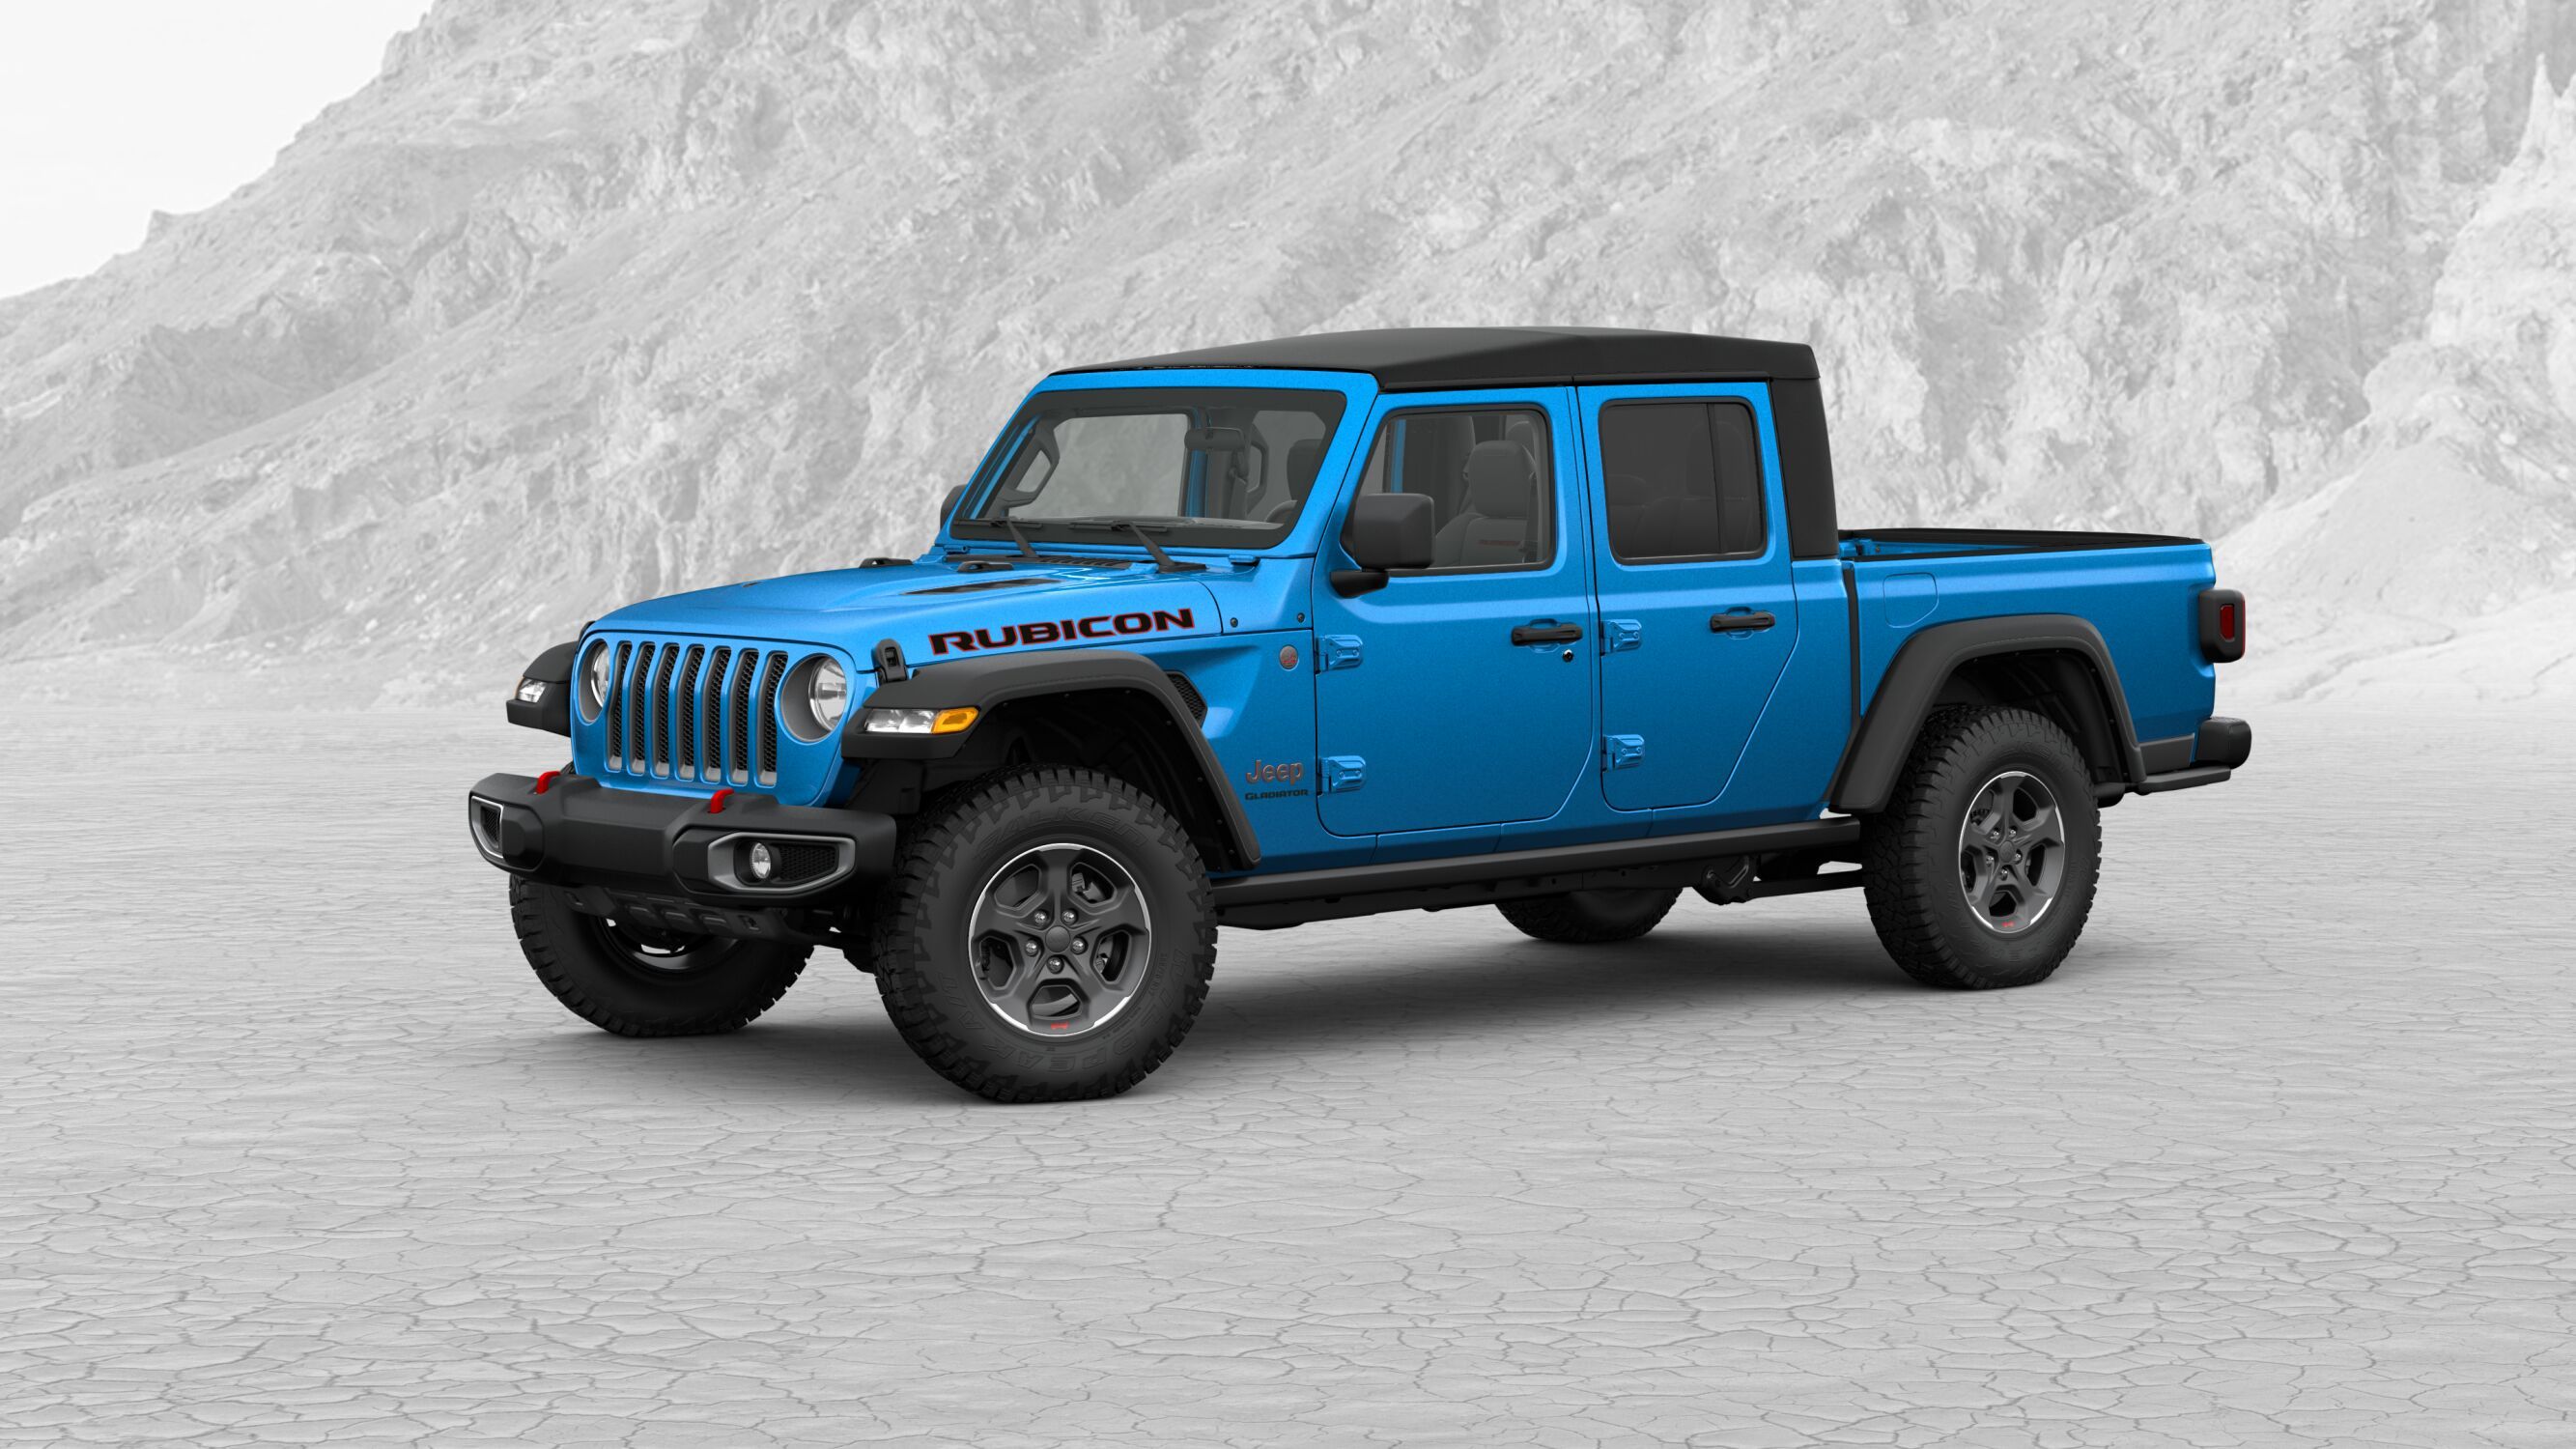 Jeep Gladiator Configurator - What You Need and What You Don't